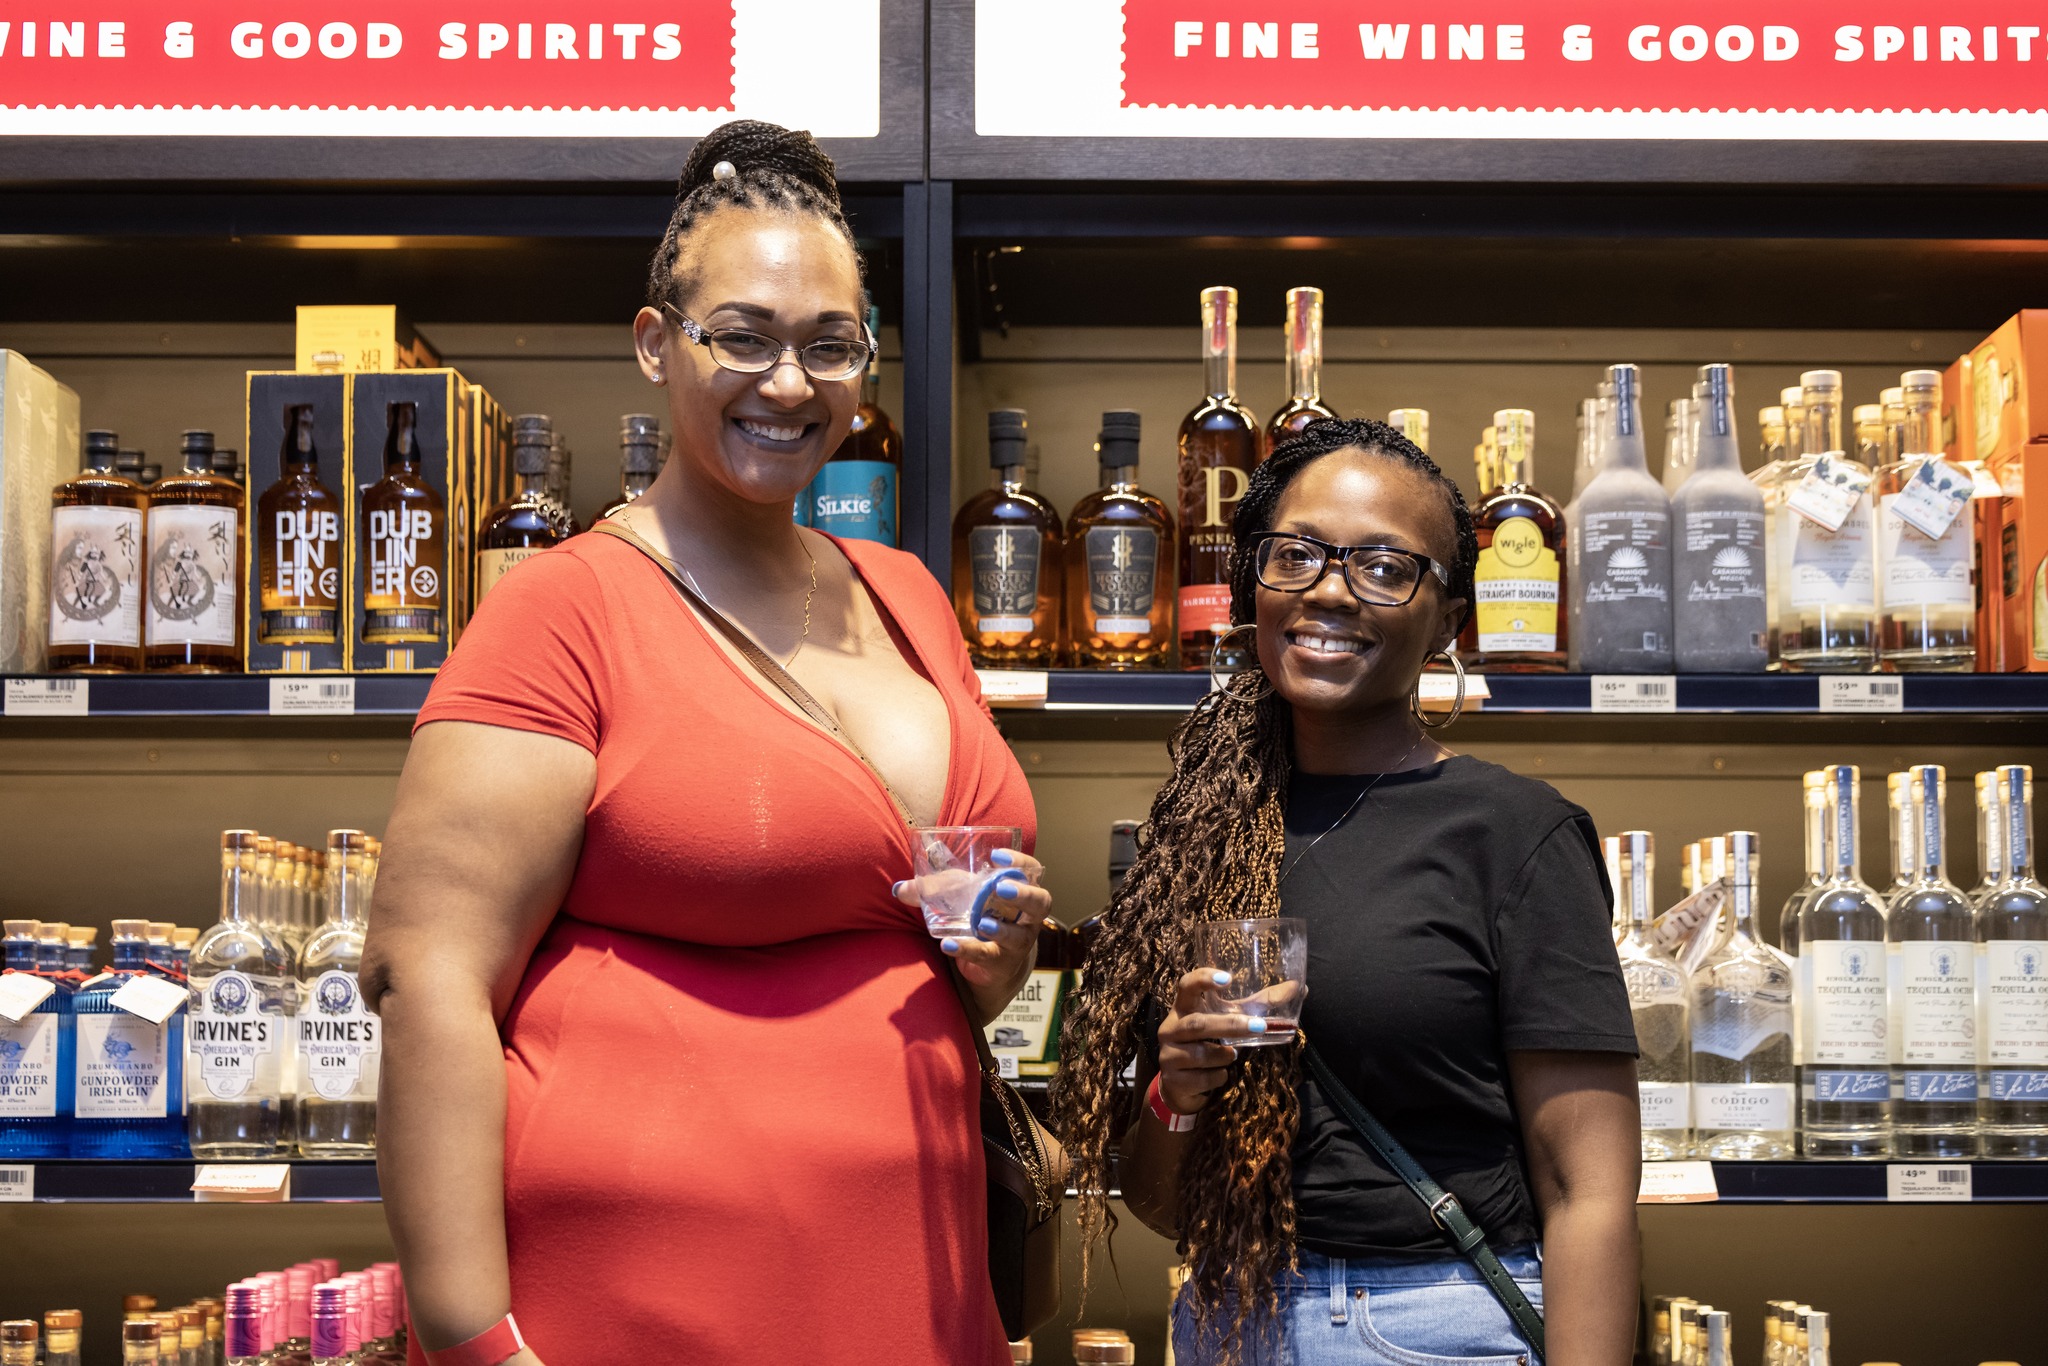 A photo of two women at the Fine Wine and Good Spirits at the Pittsburgh Wine & Spirit Festival.